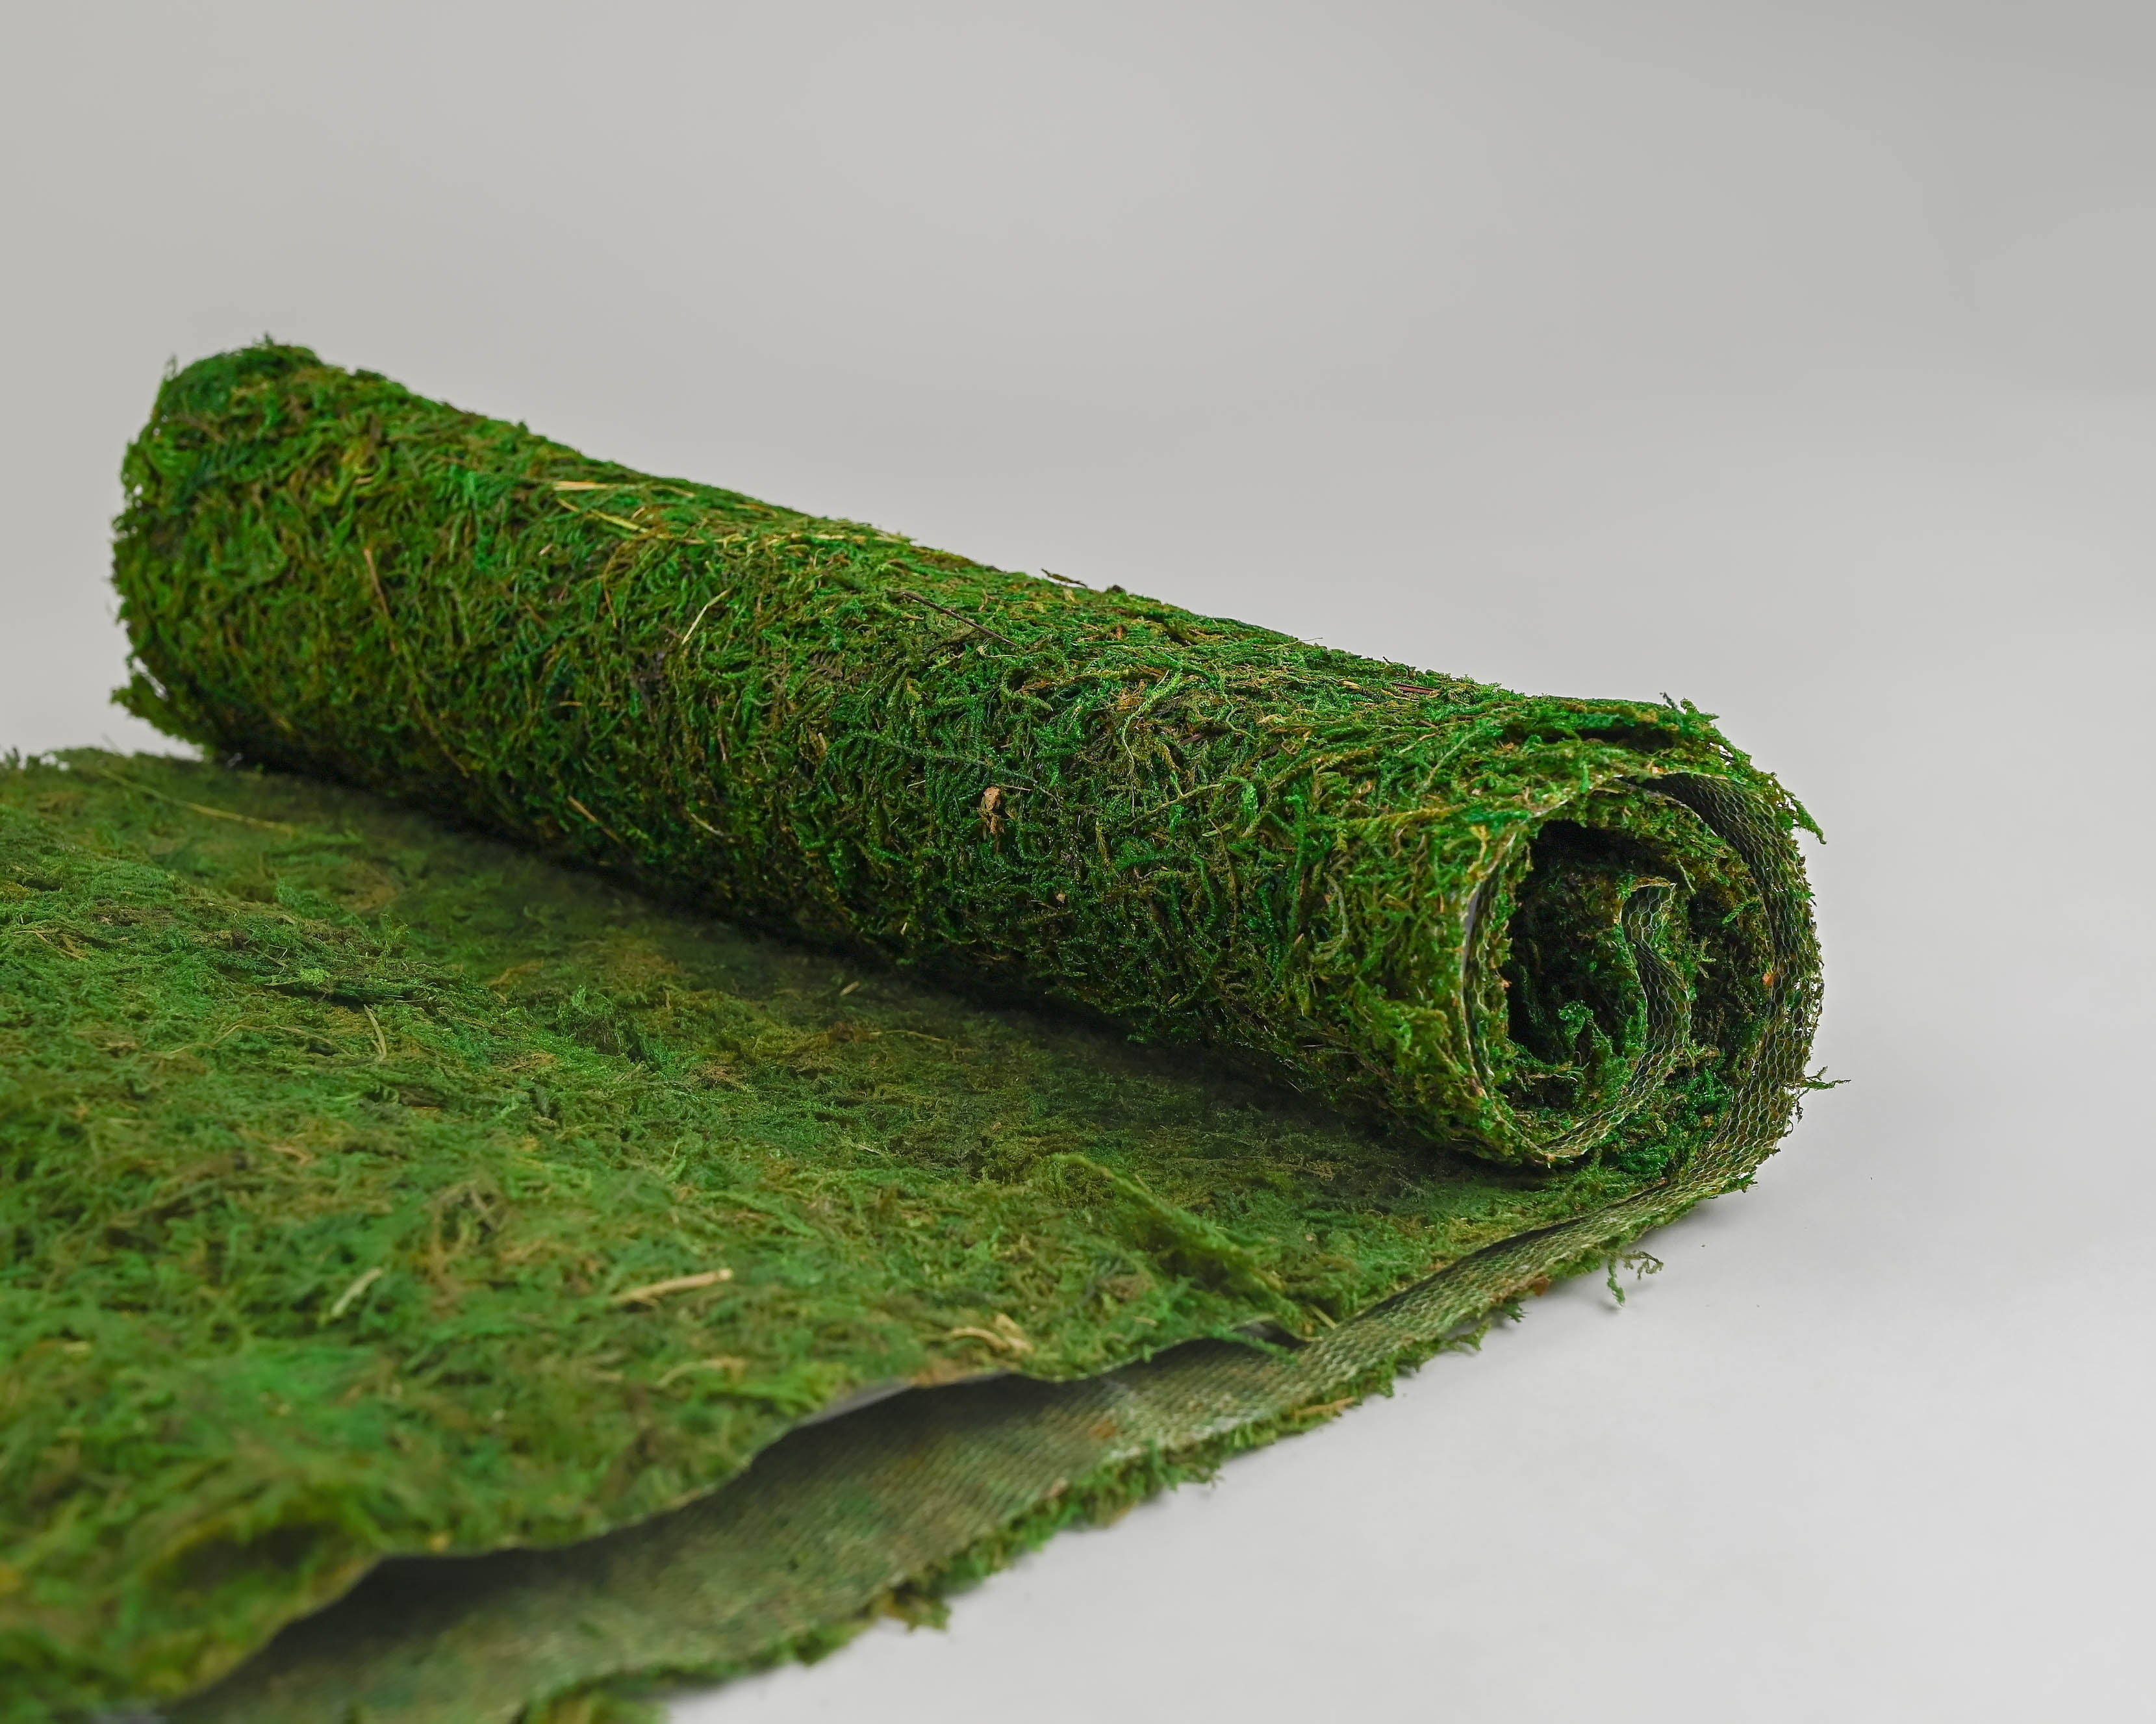 Dried Moss Table Runner